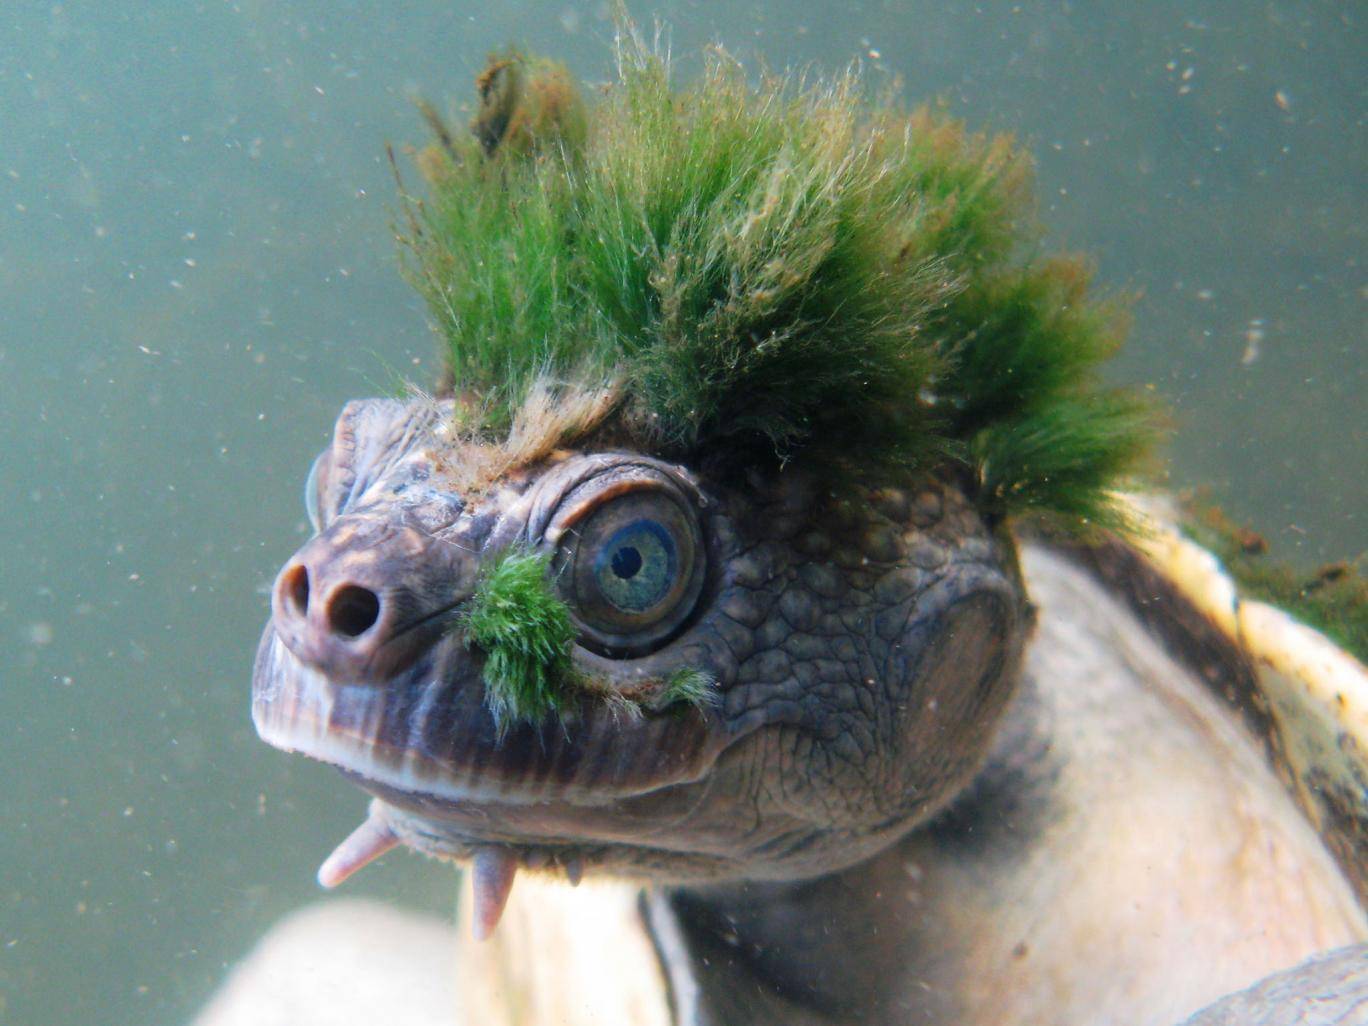 Mary River turtle in Australia faces extinction, Says New Study | Tdnews